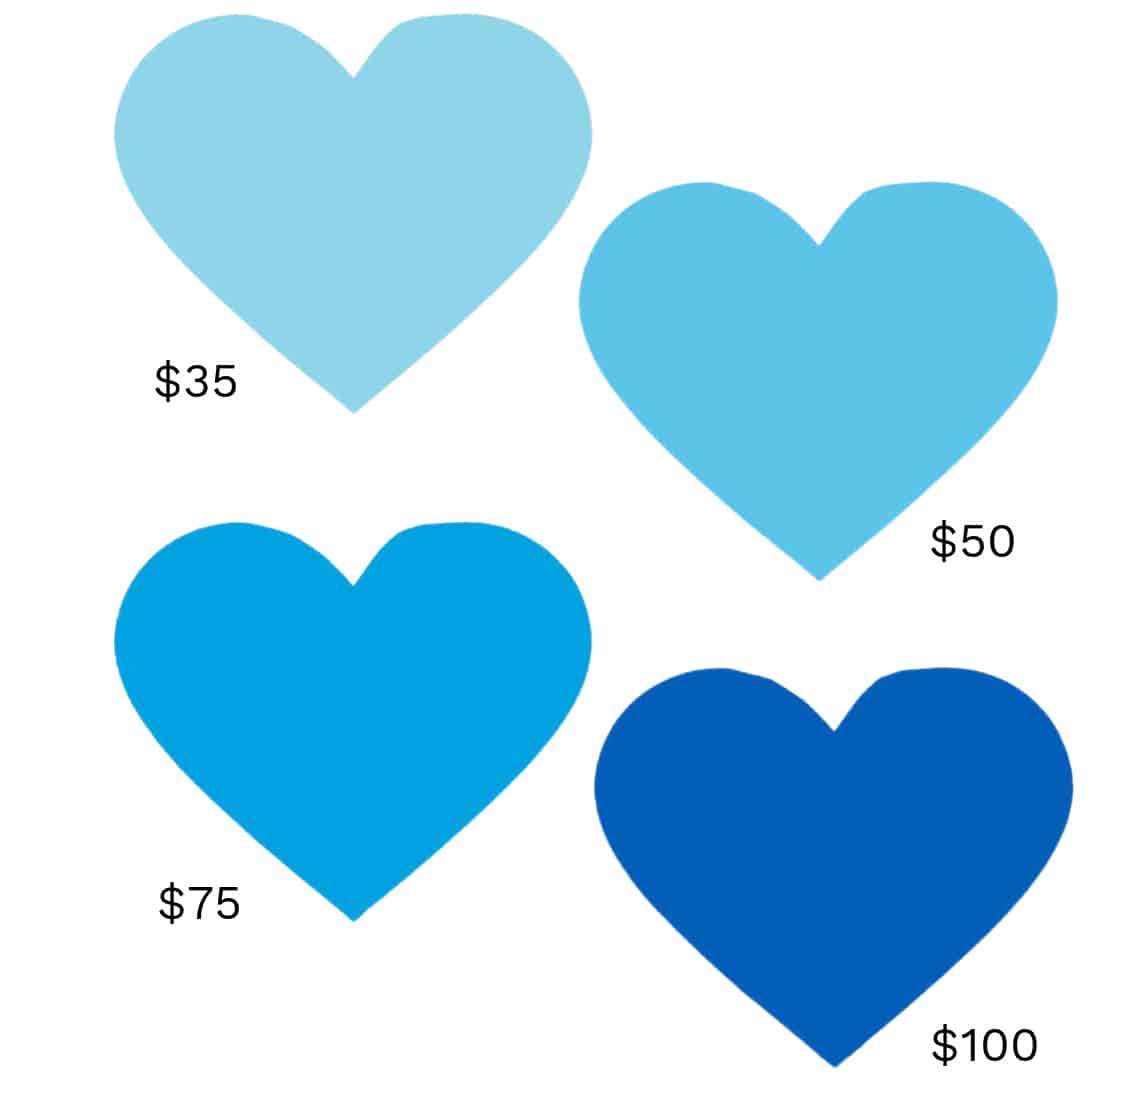 4 blue hearts with text $35, $75, $50 and $100